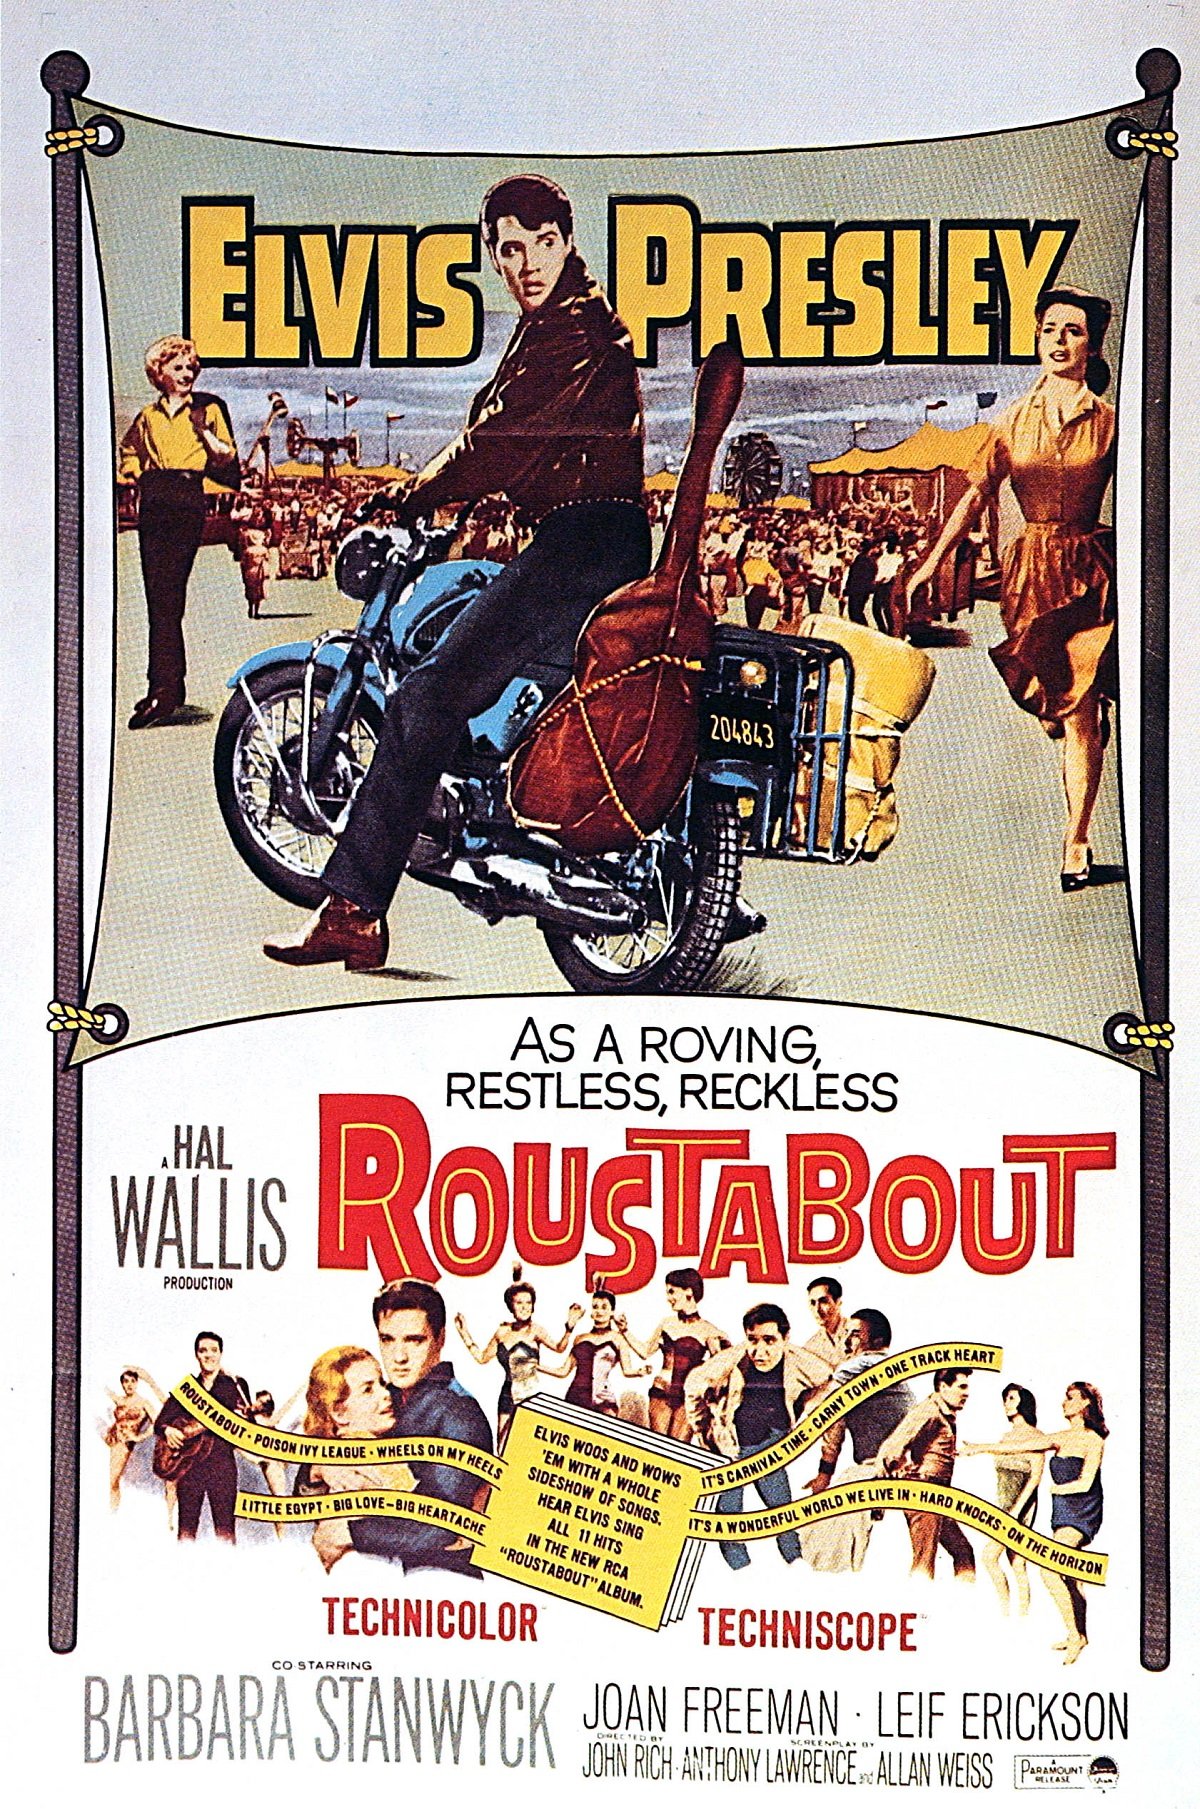 Film poster for 'Roustabout' with Elvis Presley